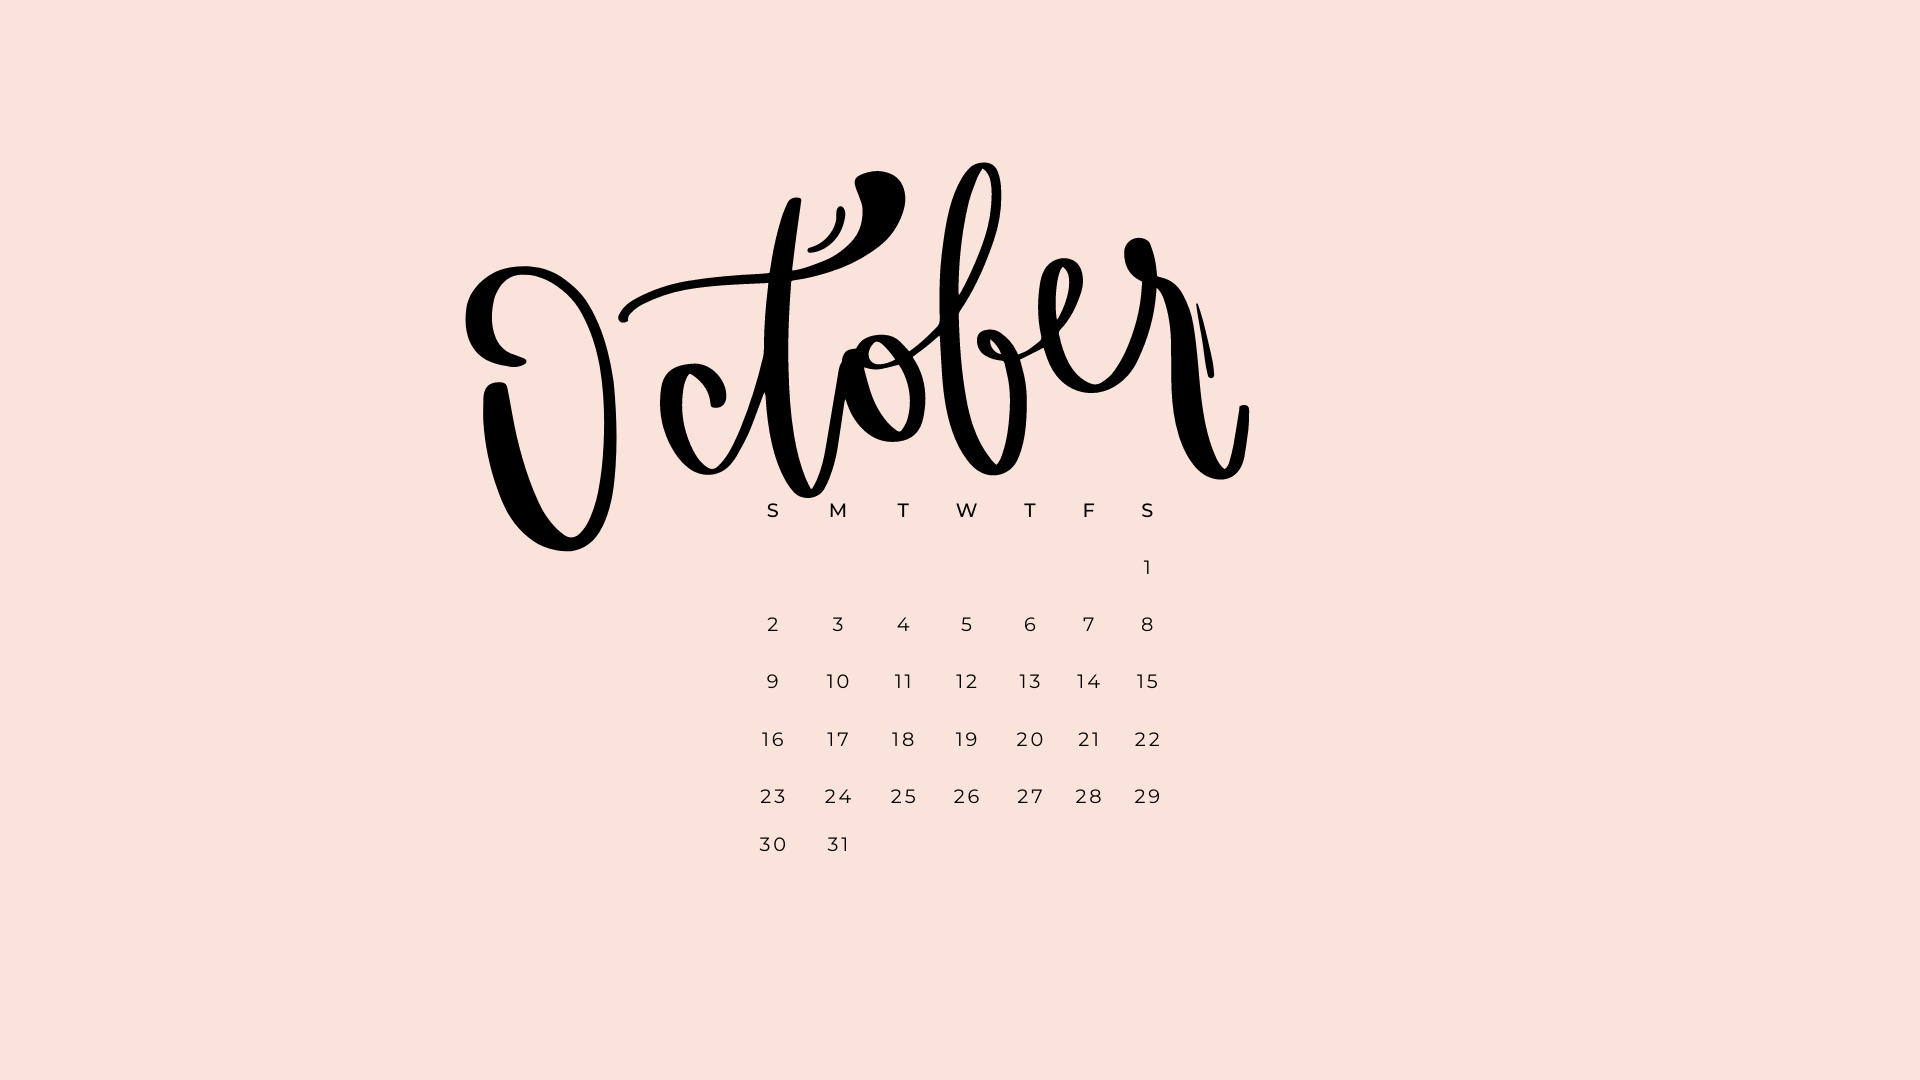 Free October 2022 Desktop Calendar Backgrounds; Here are your free October backgrounds for computers and laptops. Tech freebies for this month!